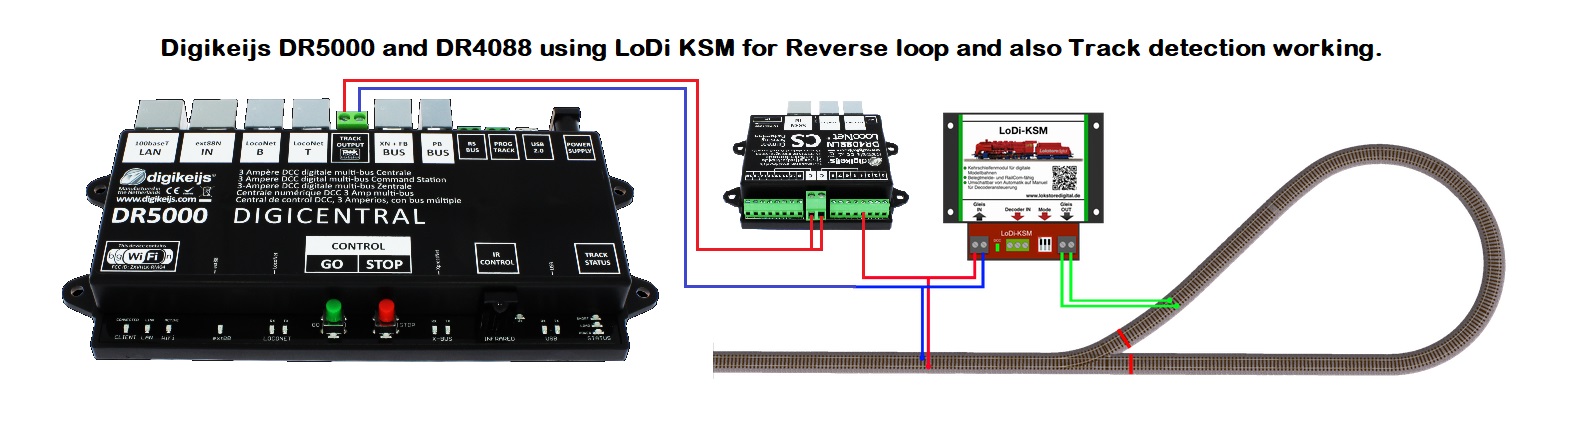 Revere loop and Track detection.